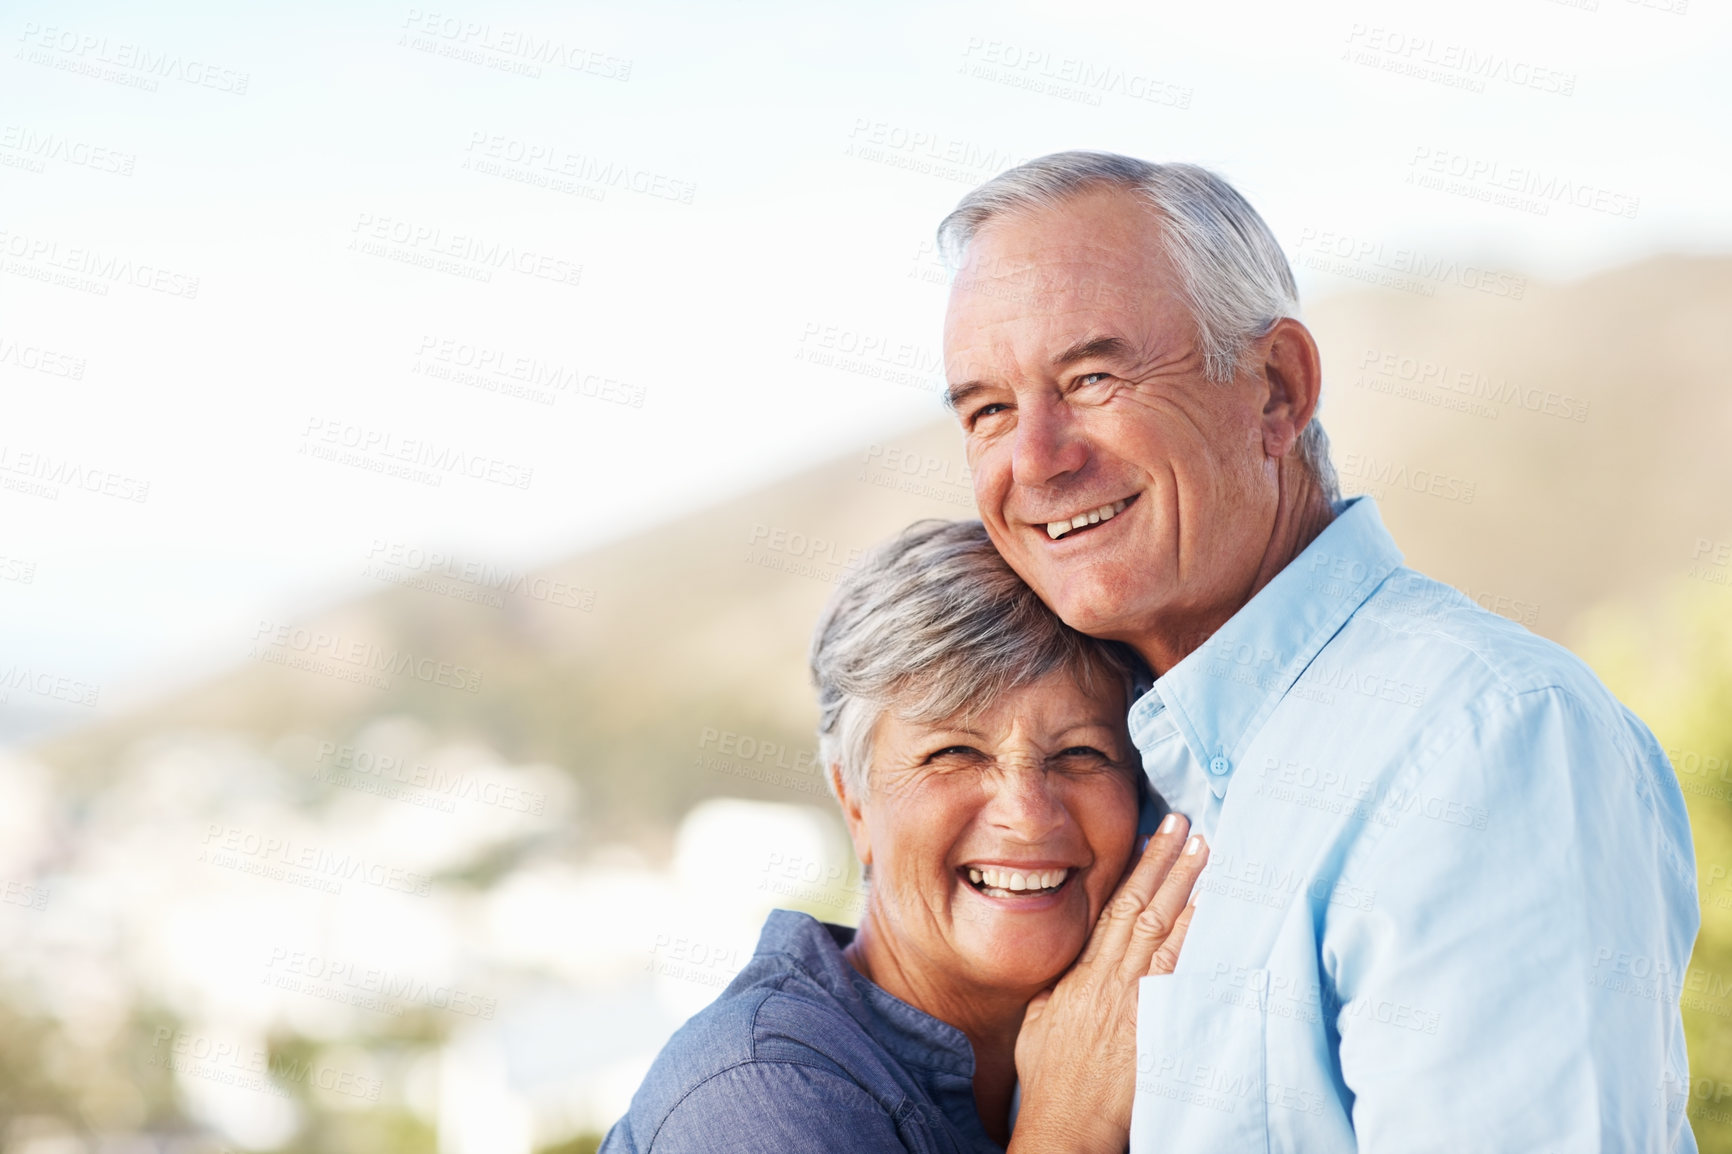 Buy stock photo Portrait of smiling mature woman leaning on man's chest with mountain in background